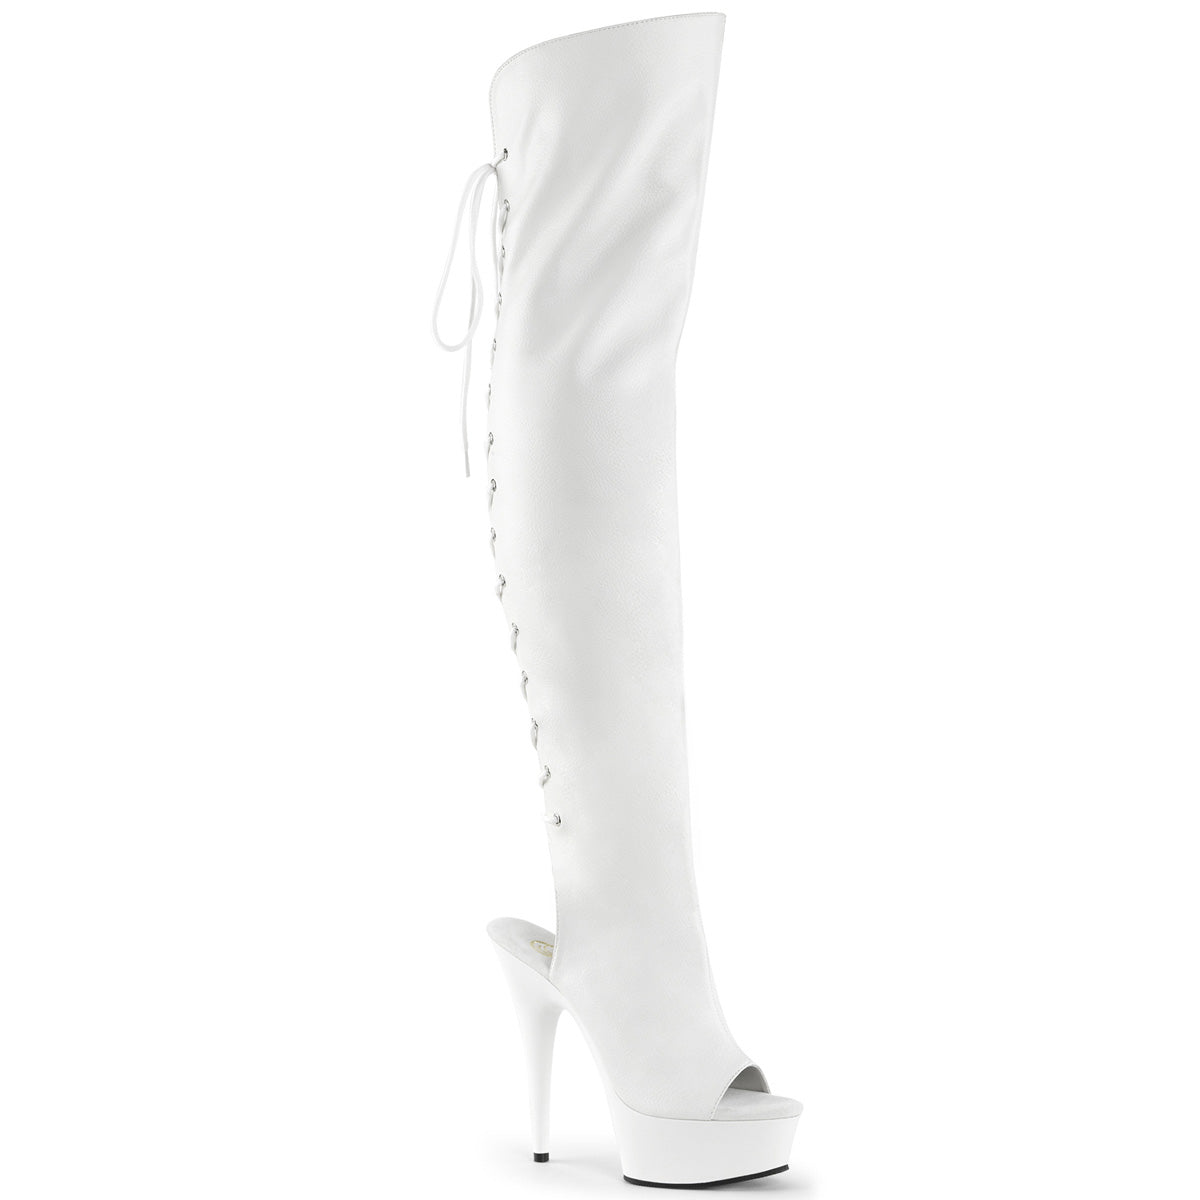 DELIGHT-3019 White Faux Leather Boots